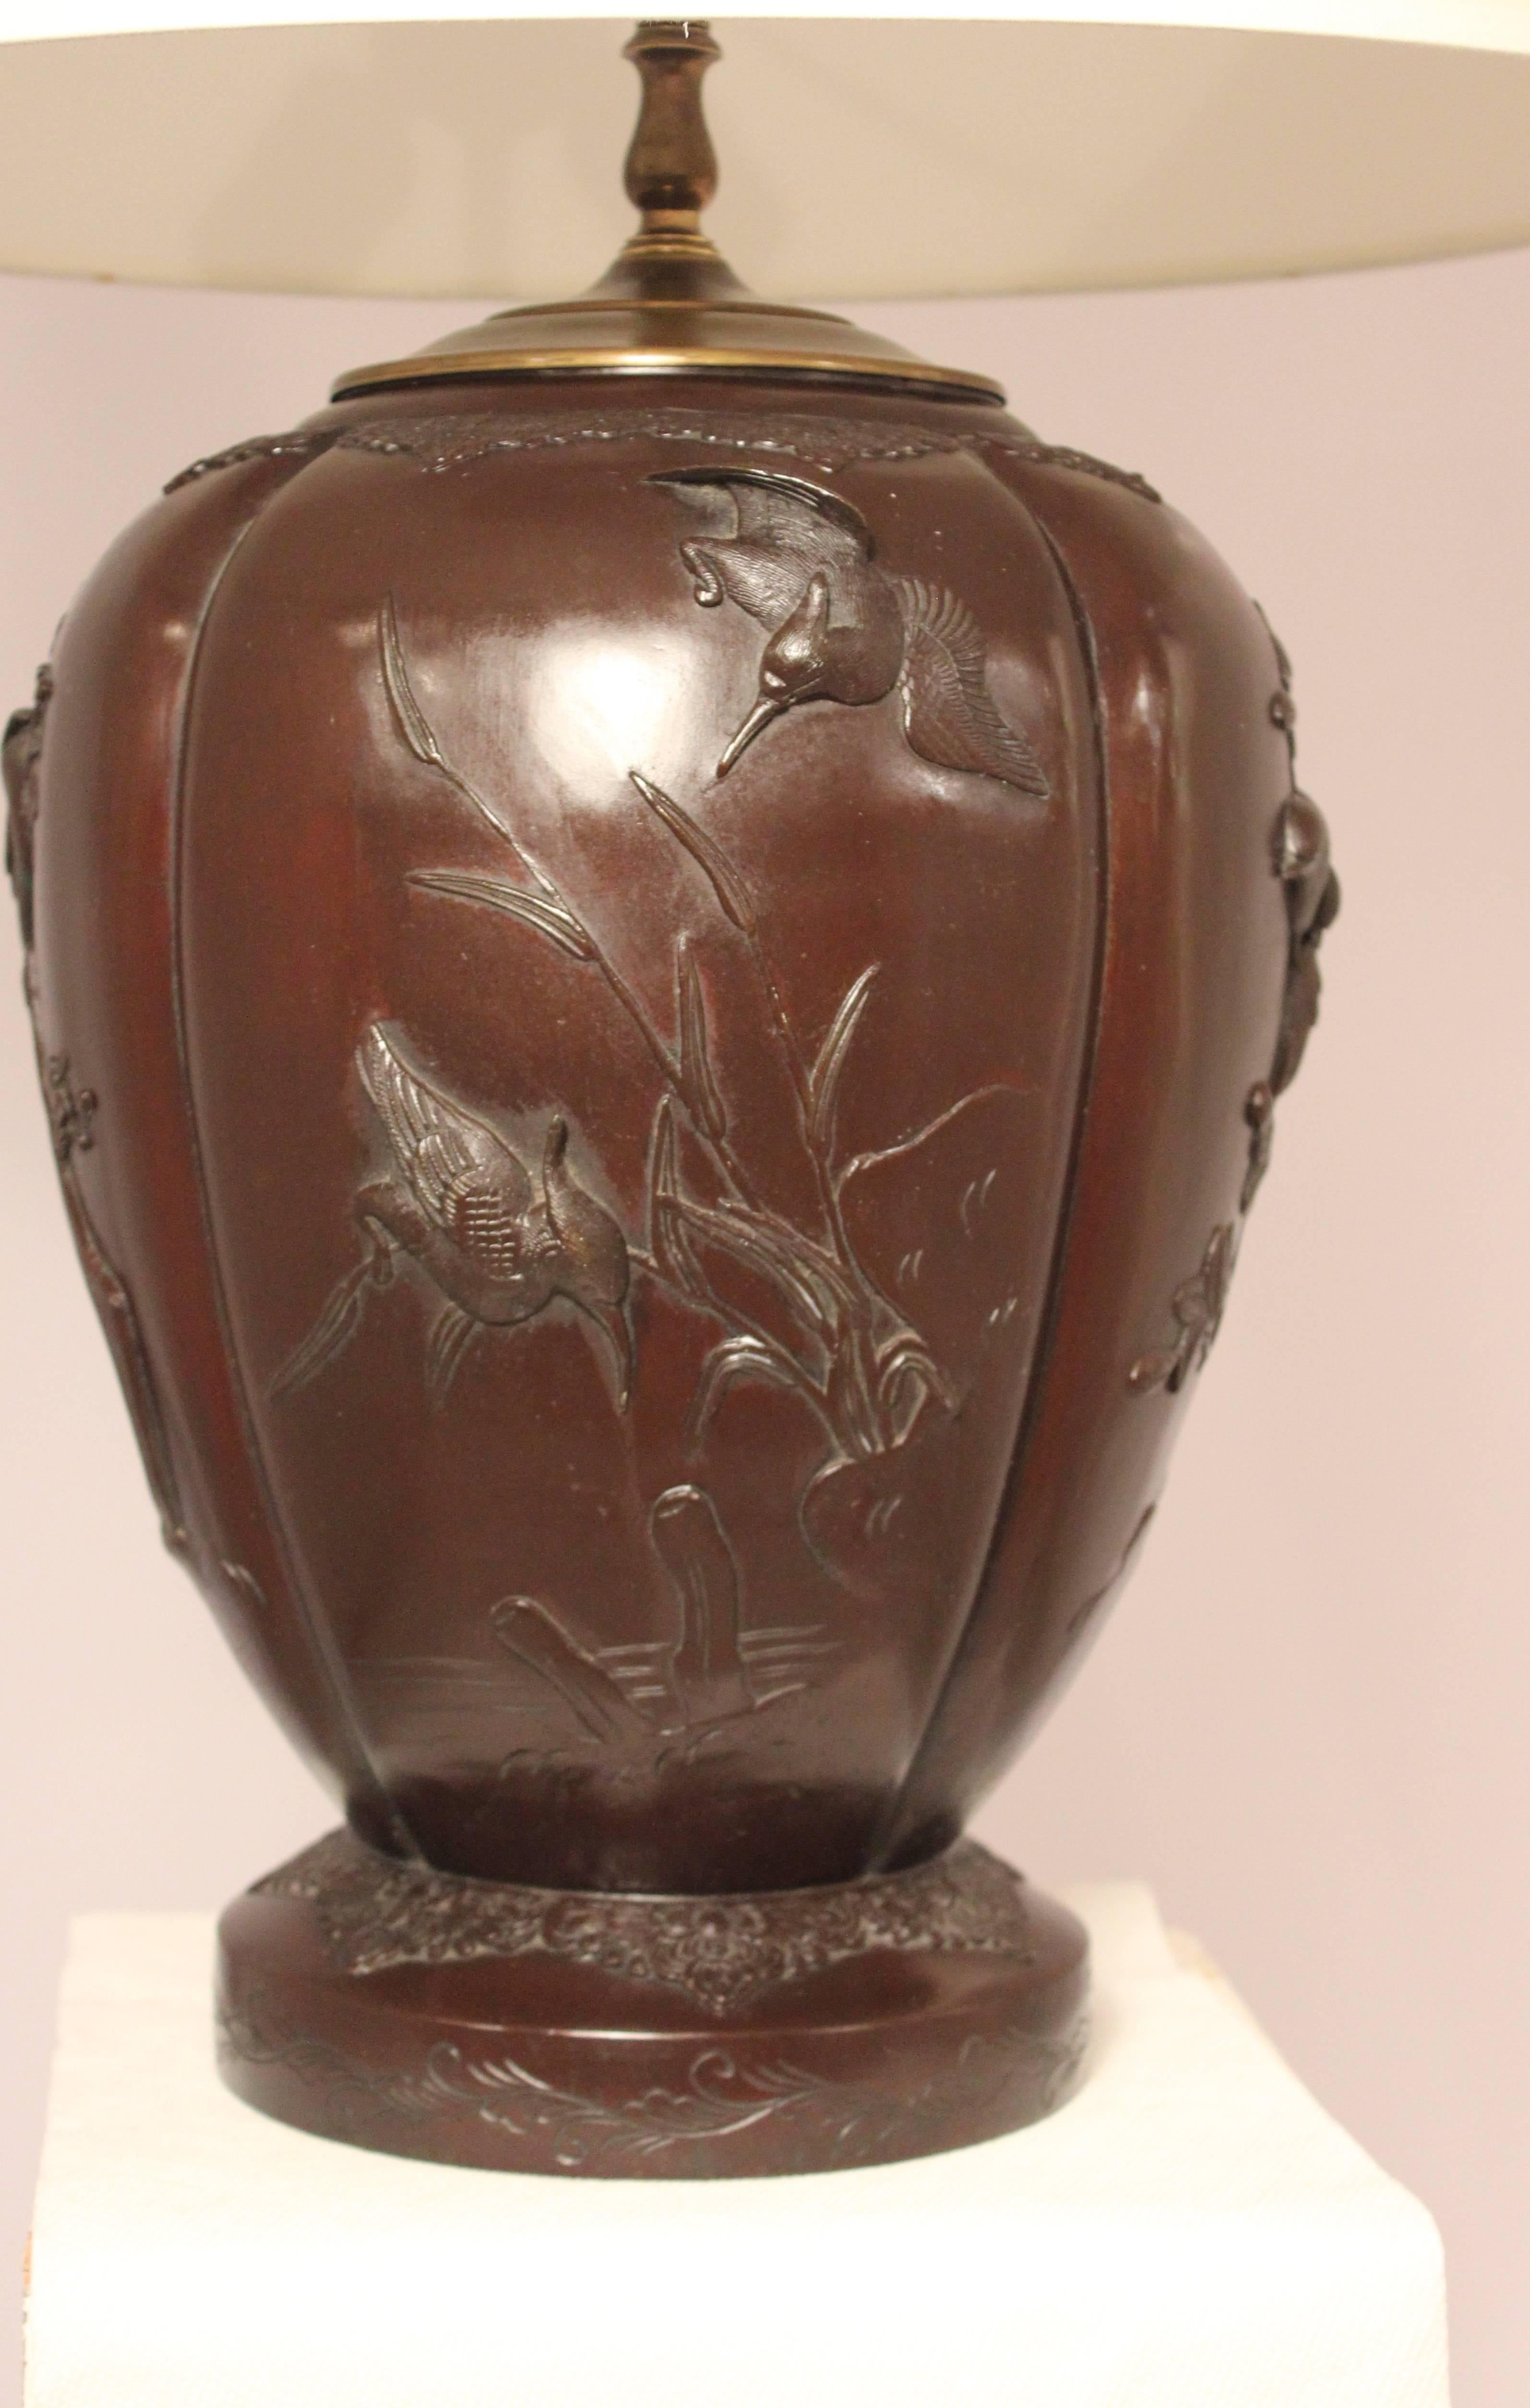 High quality bronze urn from the Meiji period, late 19th century. Lamped in the 1920s, this urn has detailed casting of hummingbirds and branches and retains its original rich brown with red undertone patina. The shade is for photographic purposes